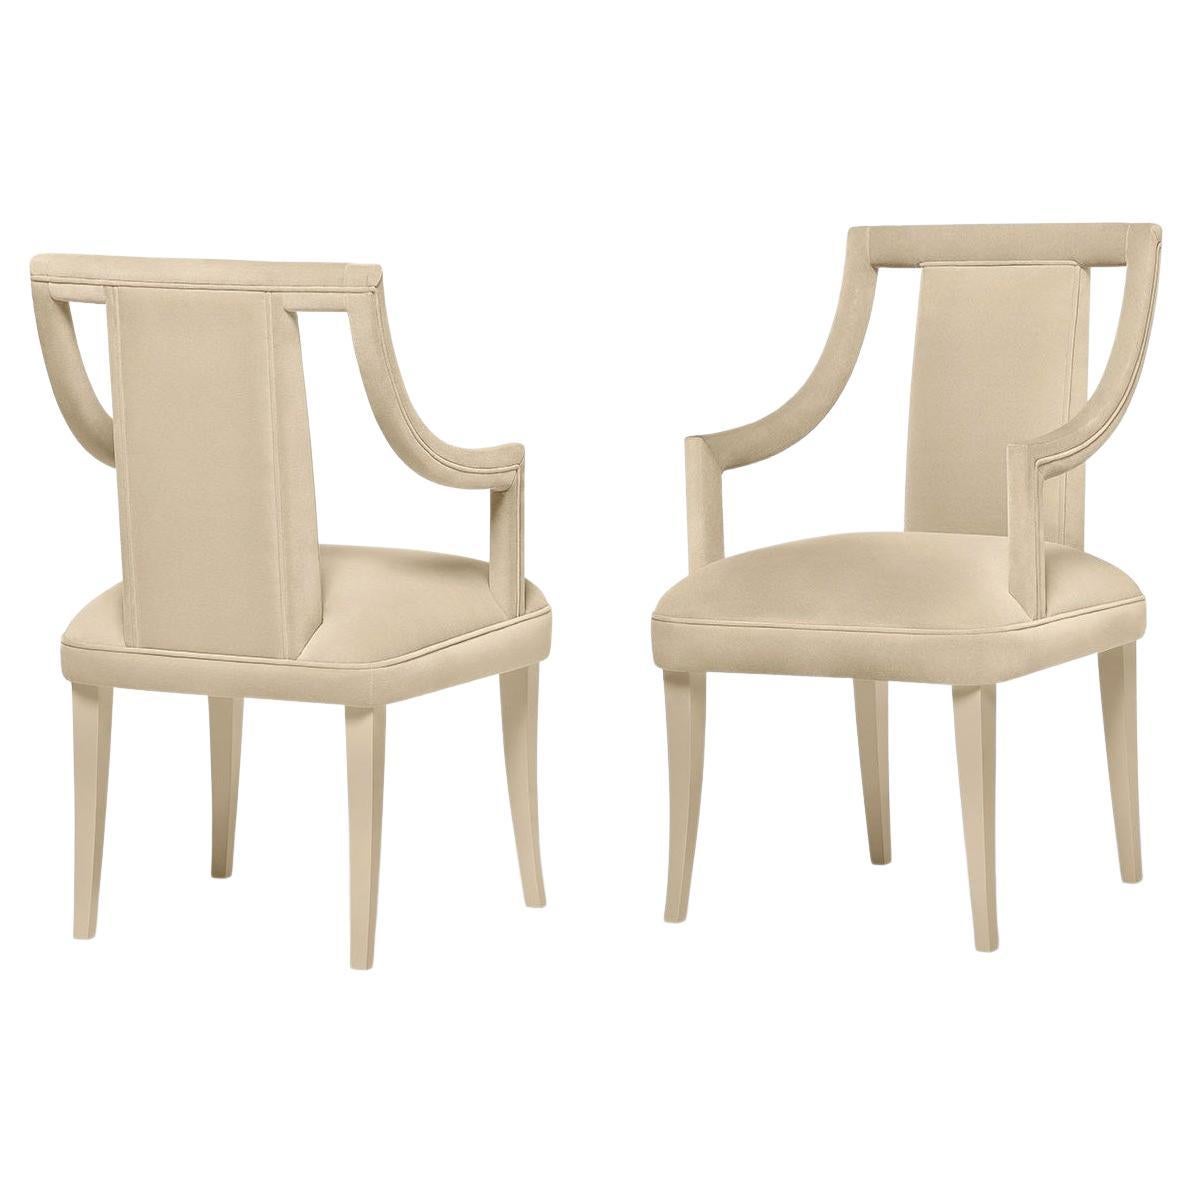 Hollywood Regency Style Dining Chair with Slimmed Down Armrests For Sale